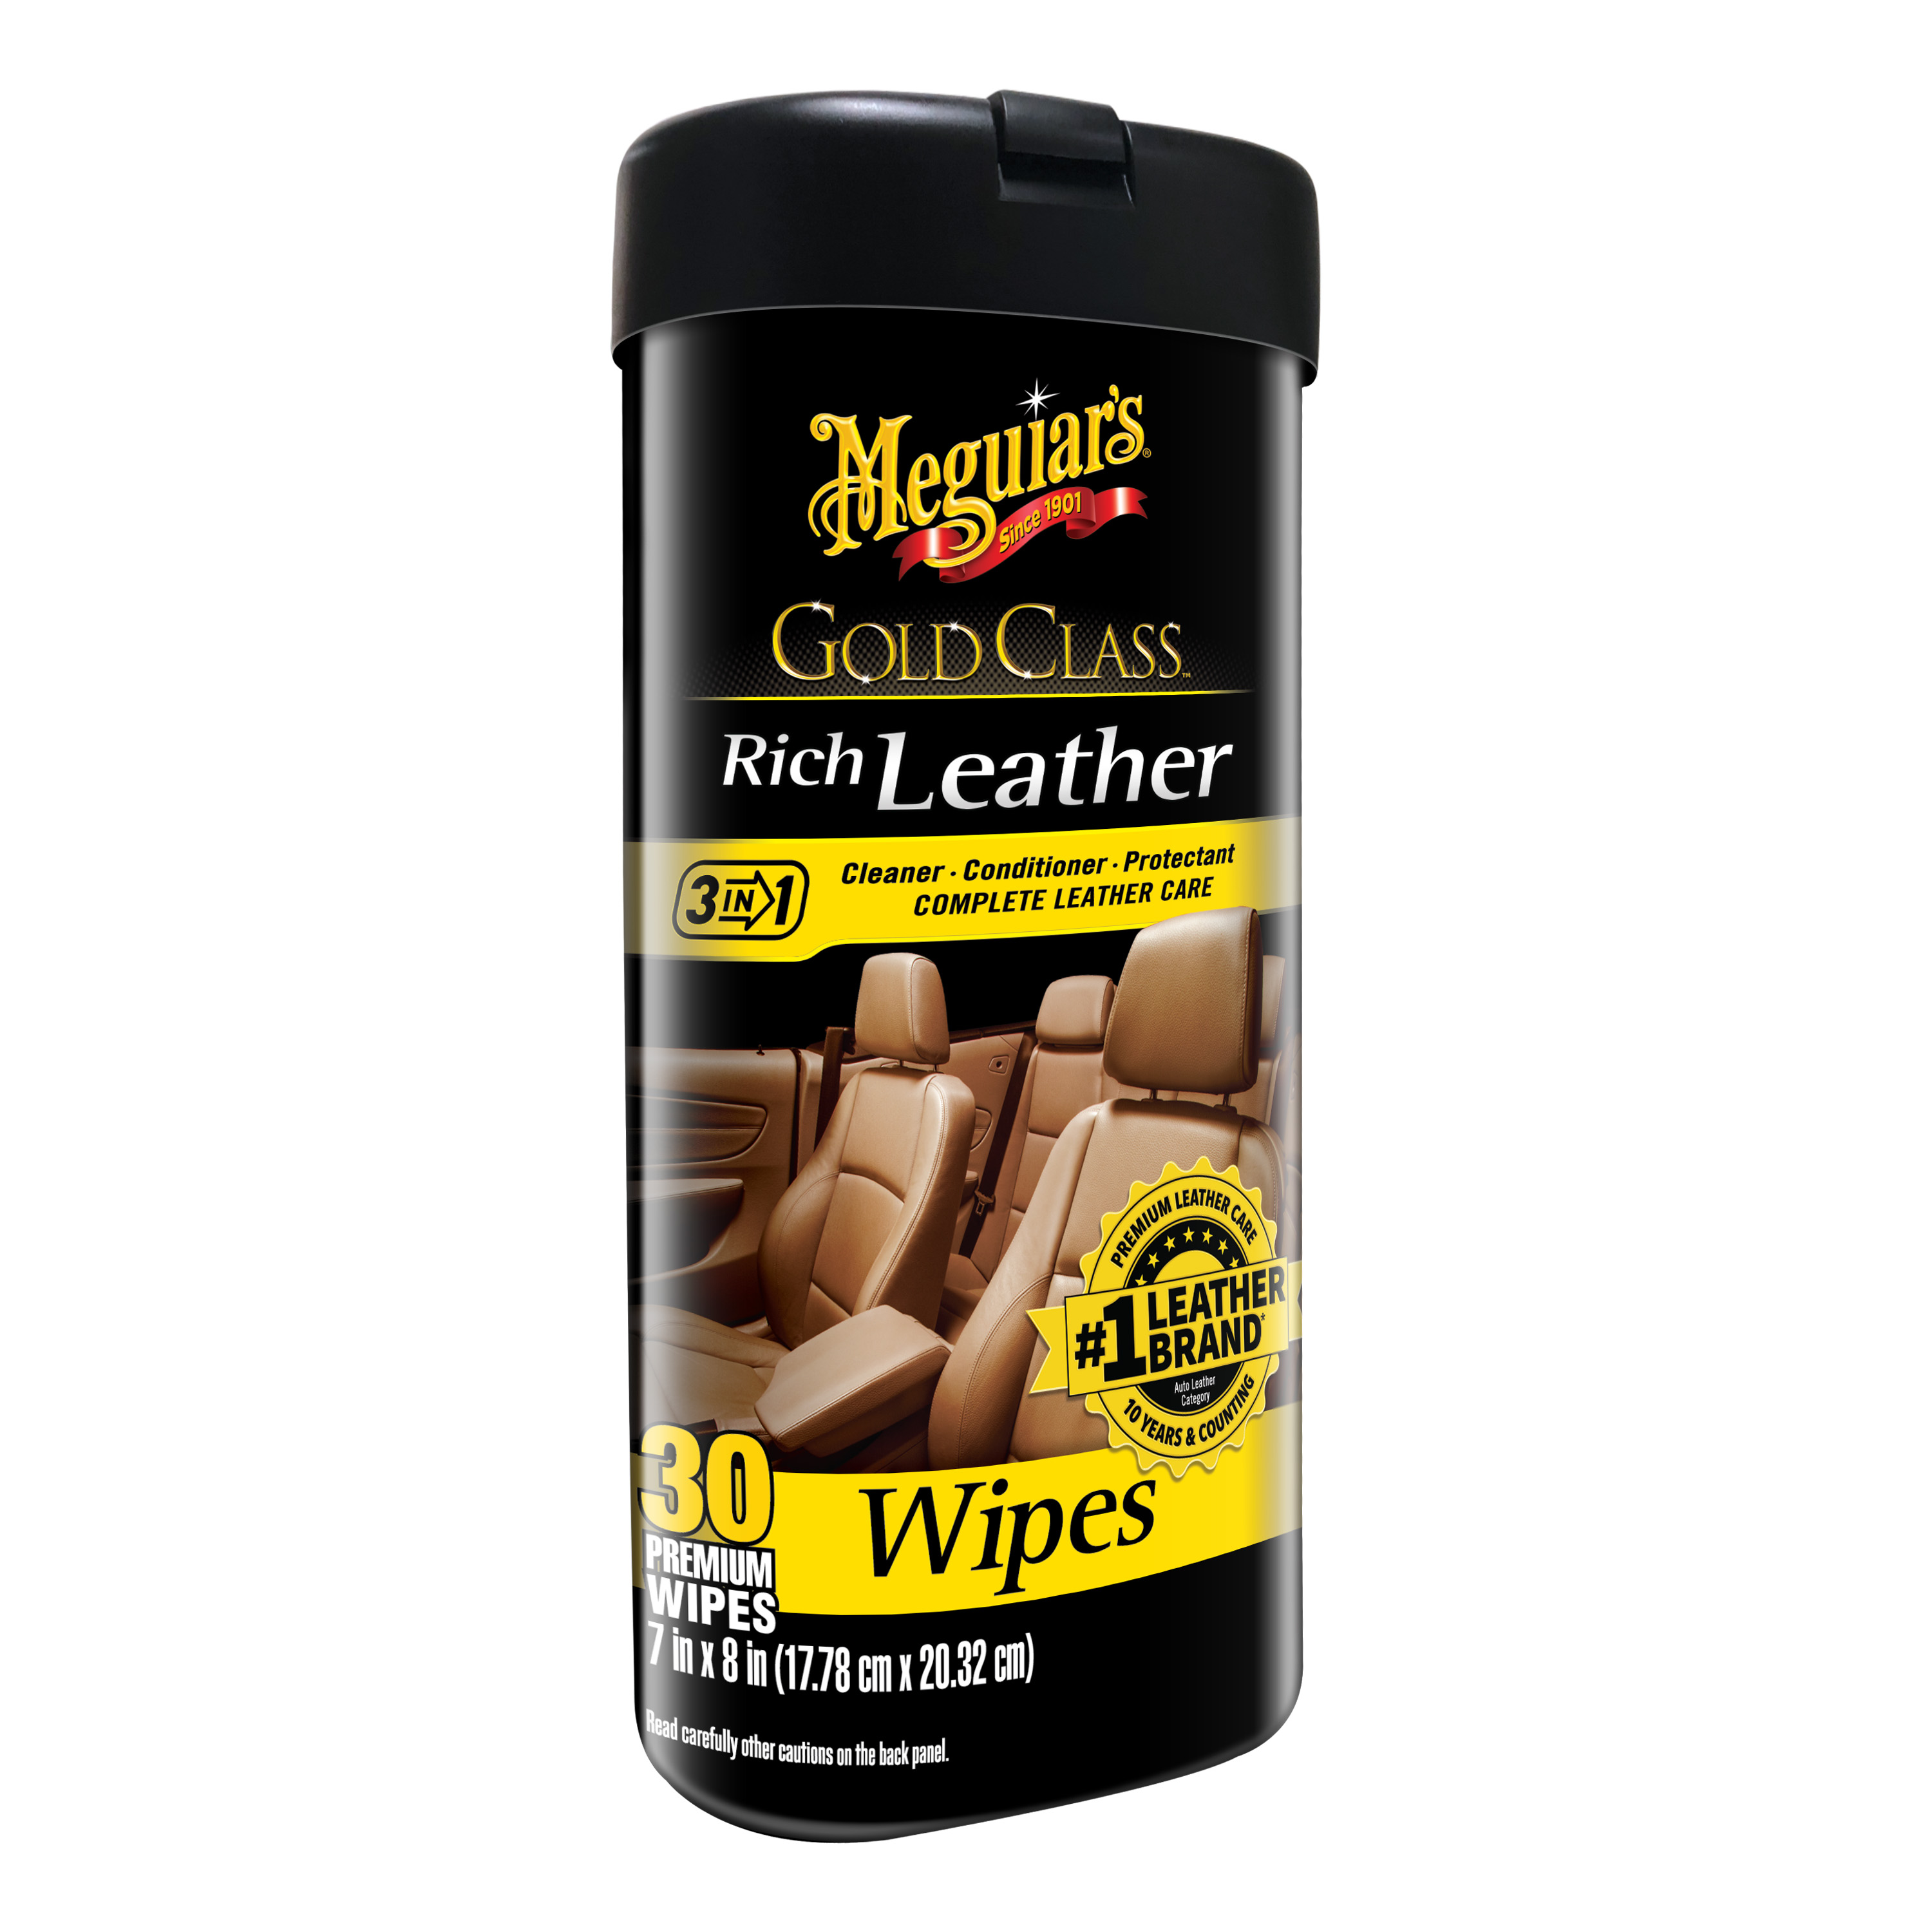 Meguiar's Gold Class Rich Leather Wipes – Leather Cleaner & Conditioner – G10900, 25 Wipes - image 1 of 12